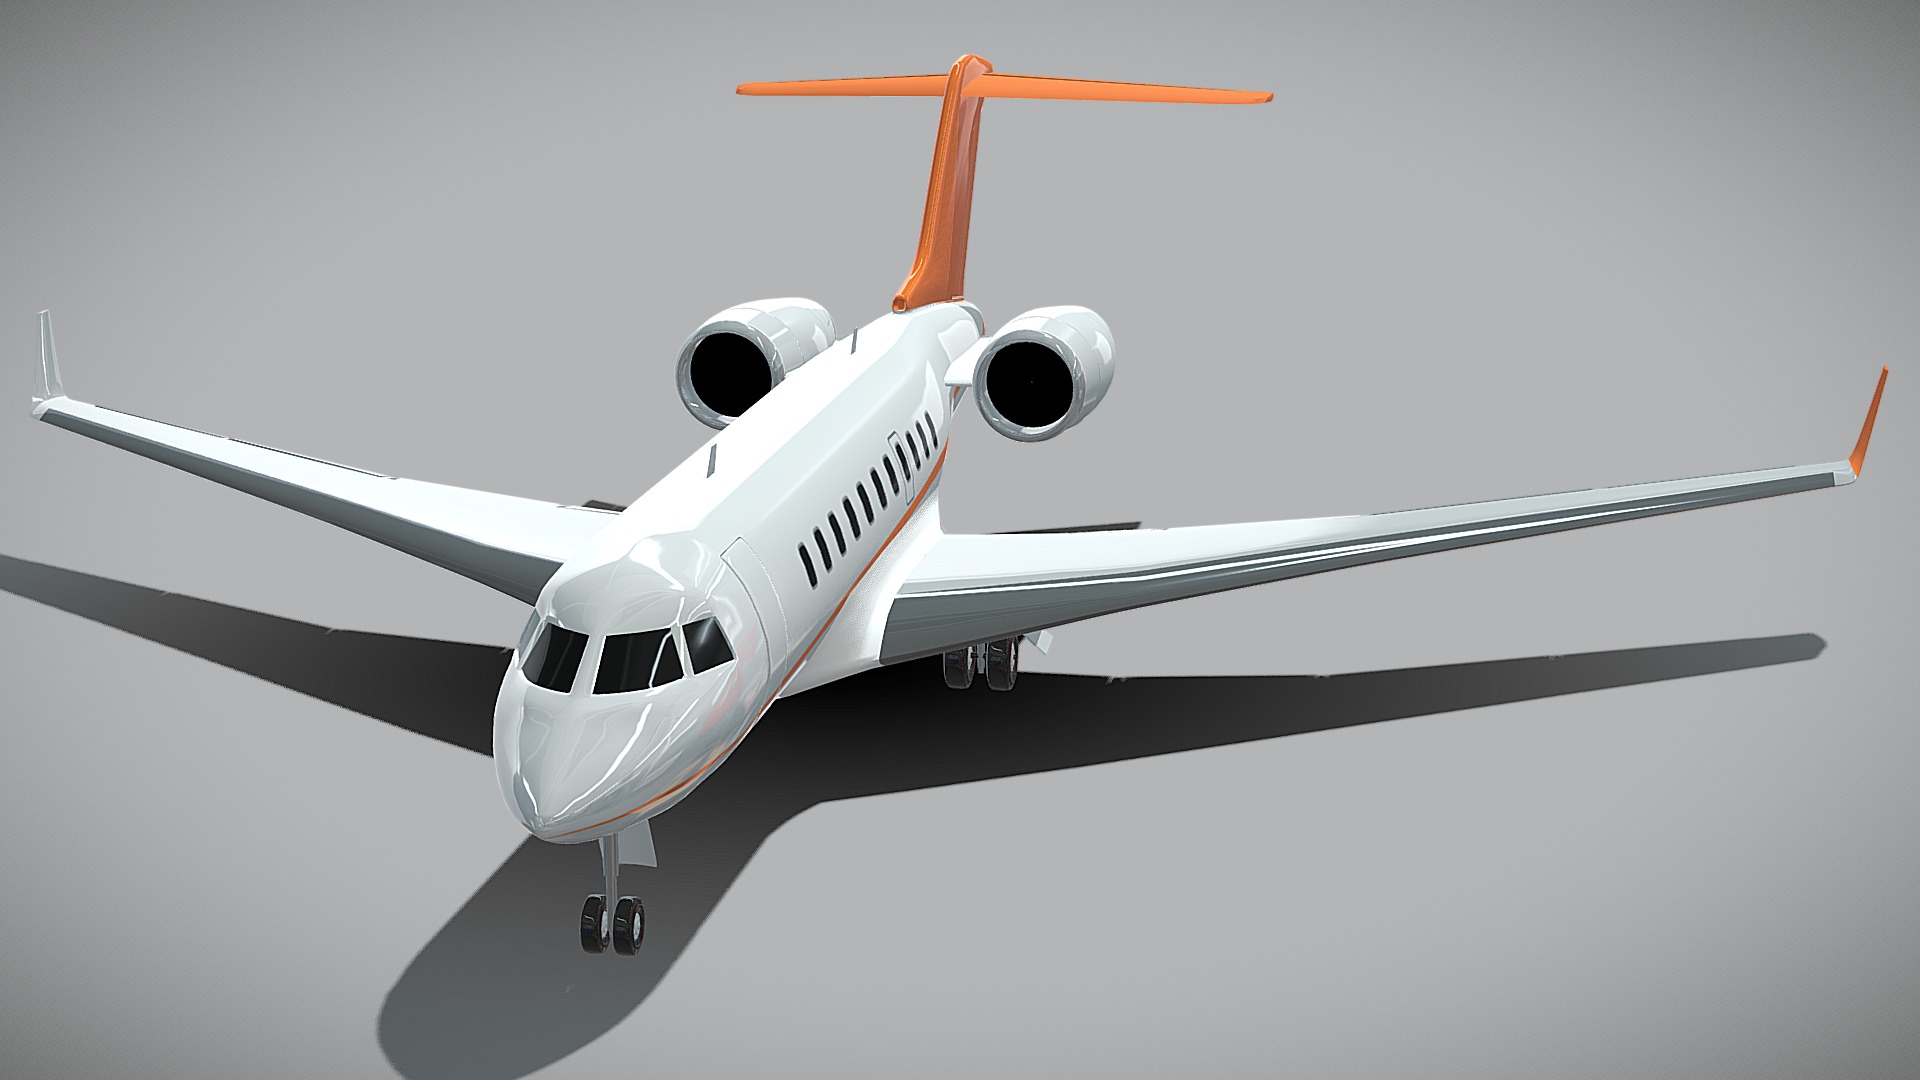 3D model Bombardier 5000 Global corporate jet - This is a 3D model of the Bombardier 5000 Global corporate jet. The 3D model is about a white airplane with a red tail.